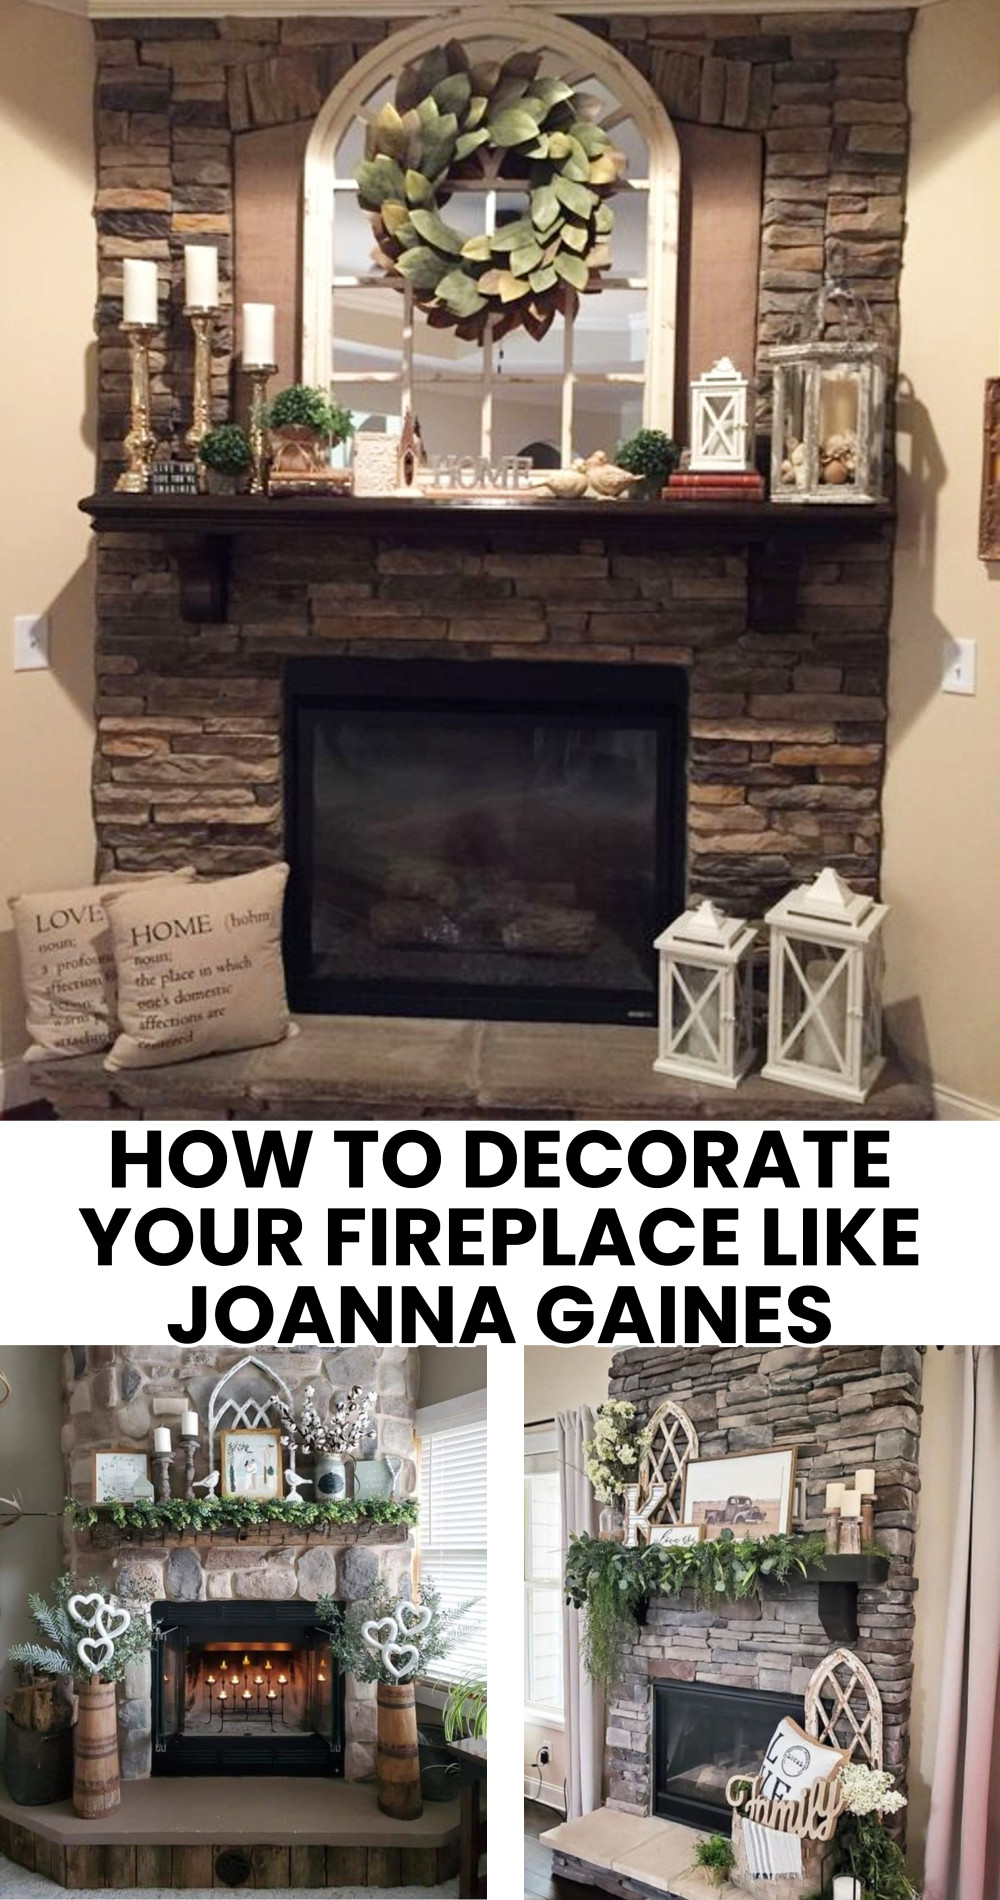 How To Decorate Your Fireplace Like Joanna Gaines